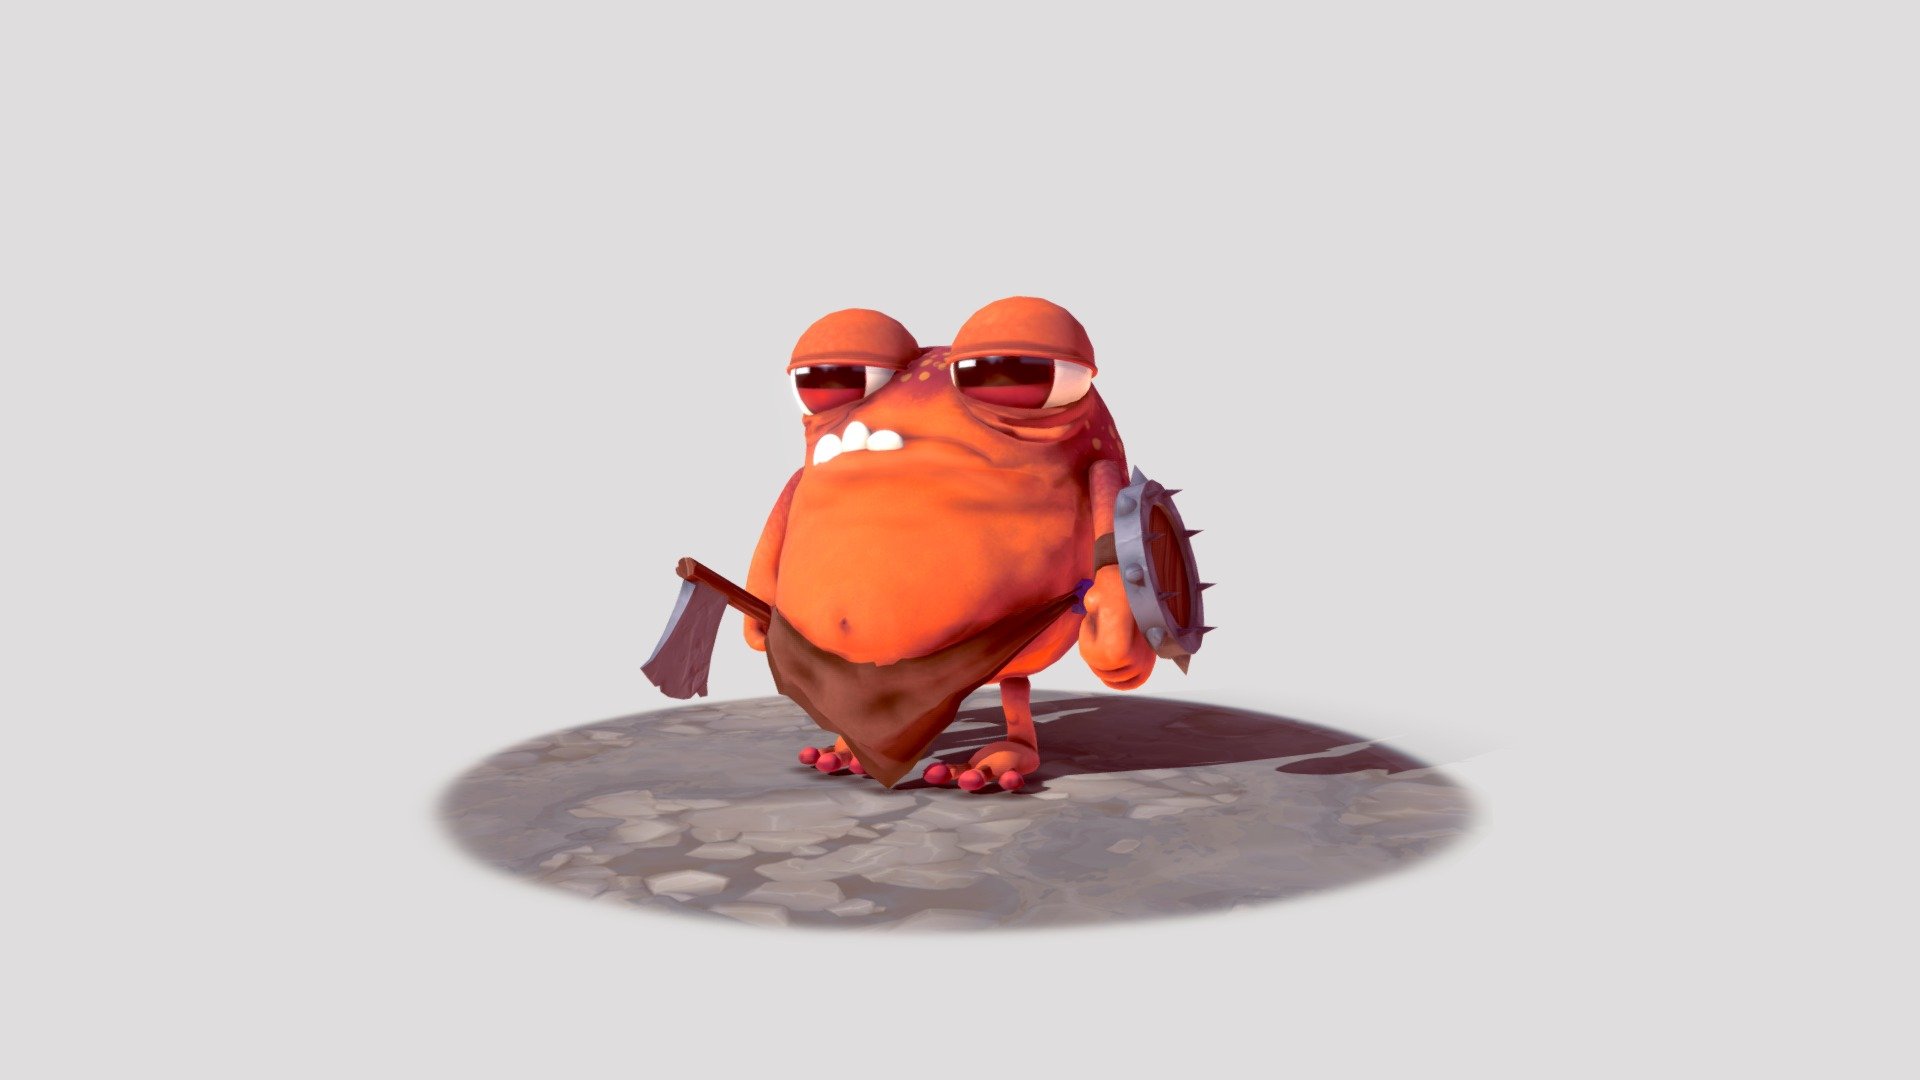 Created in Zbrush, Retopologized in Maya, Textured in Substance Painter

Concept inspired by Derrek Laufman - Battle Toad - 3D model by katie.mutton 3d model